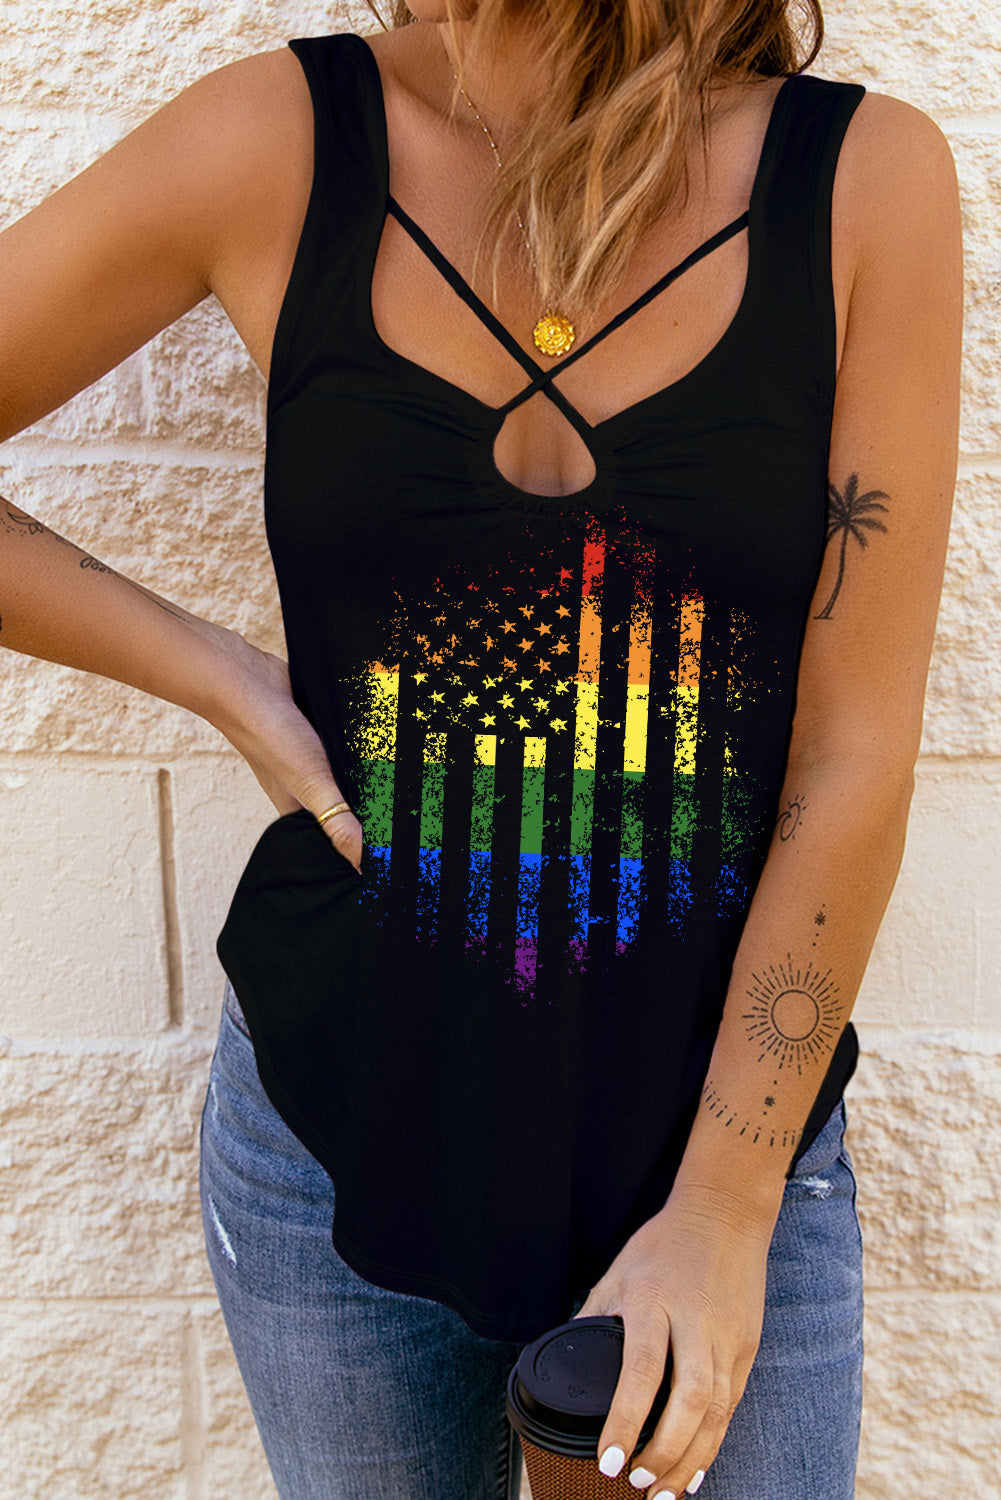 LC2566668-2-S, LC2566668-2-M, LC2566668-2-L, LC2566668-2-XL, LC2566668-2-2XL, Black Women's Rainbow American Flag Tank Tops for Women Sleeveless Lace Up T-Shirt